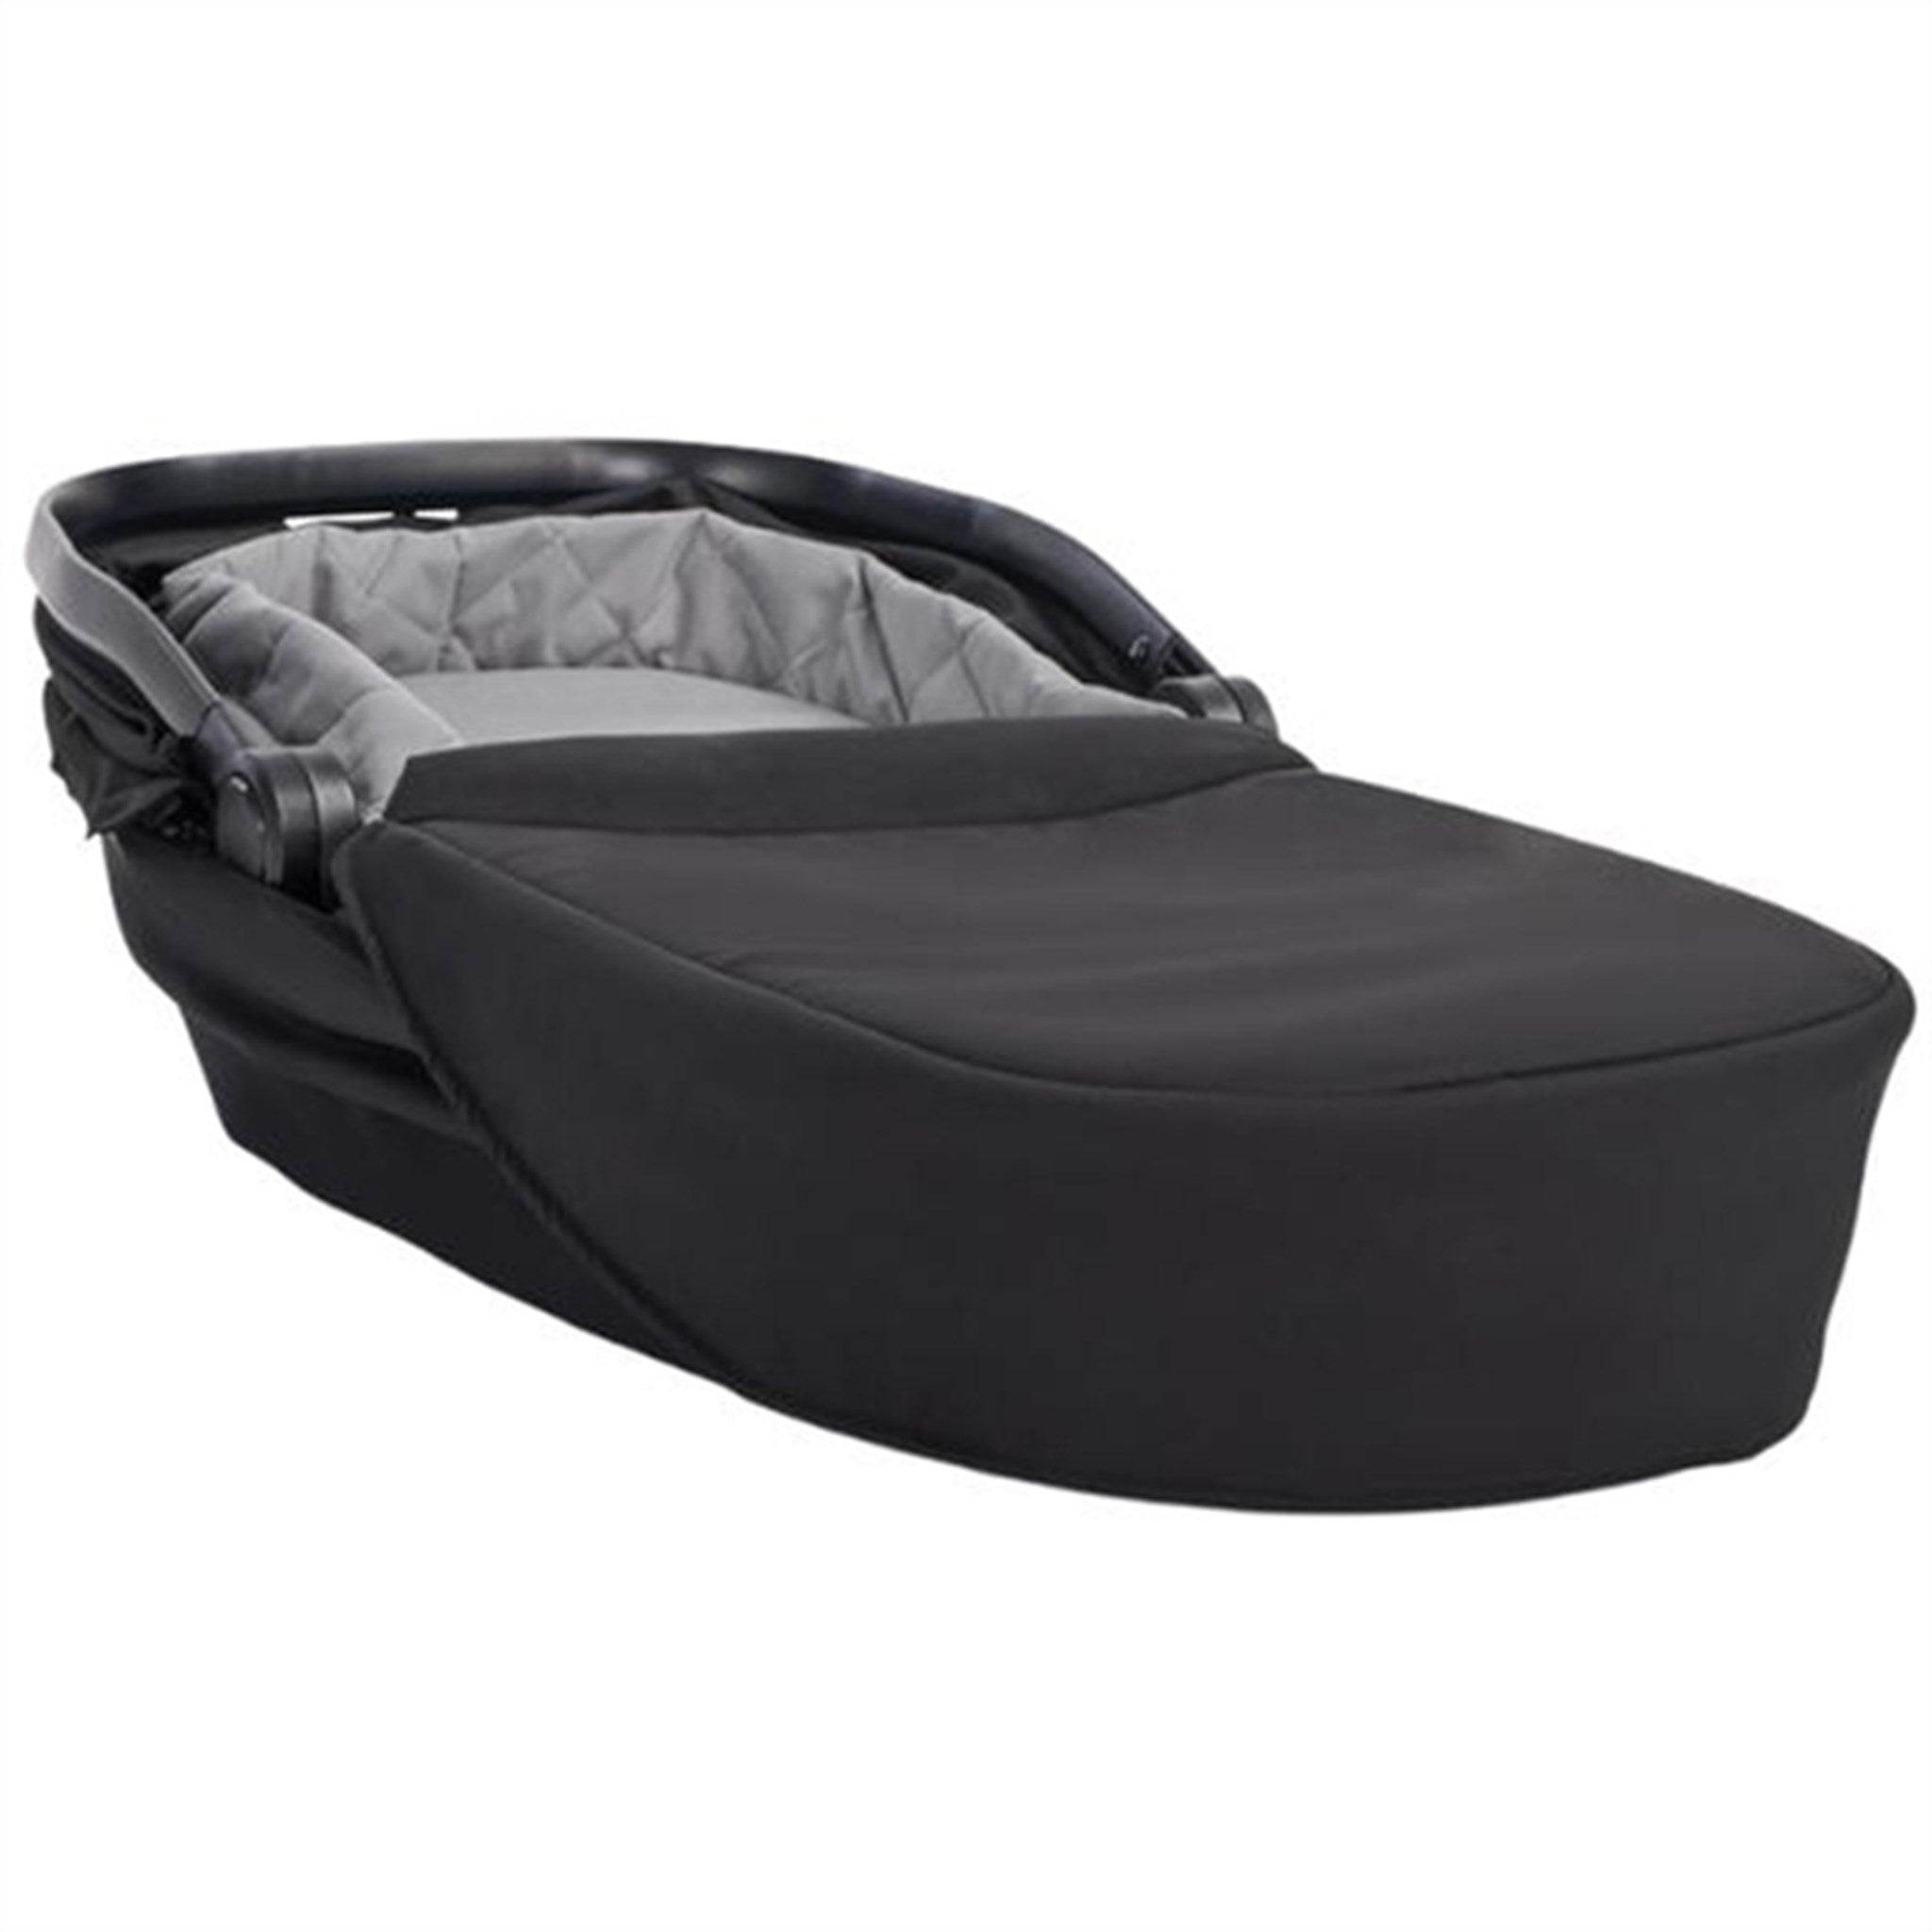 Baby Jogger Bassinet For City Sights Rich Black